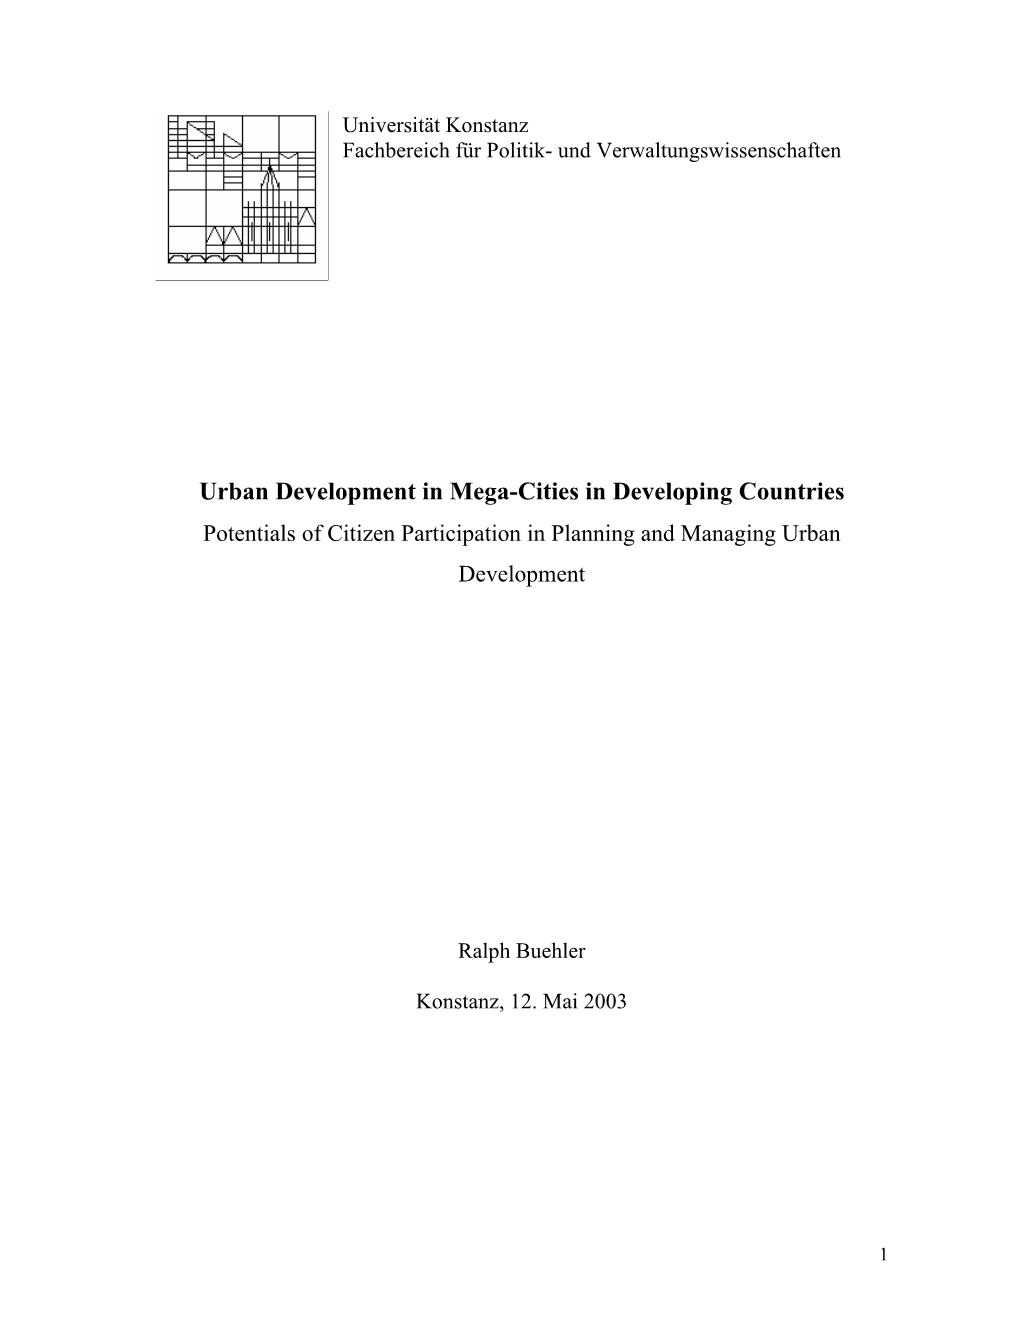 Urban Development in Mega-Cities in Developing Countries Potentials of Citizen Participation in Planning and Managing Urban Development